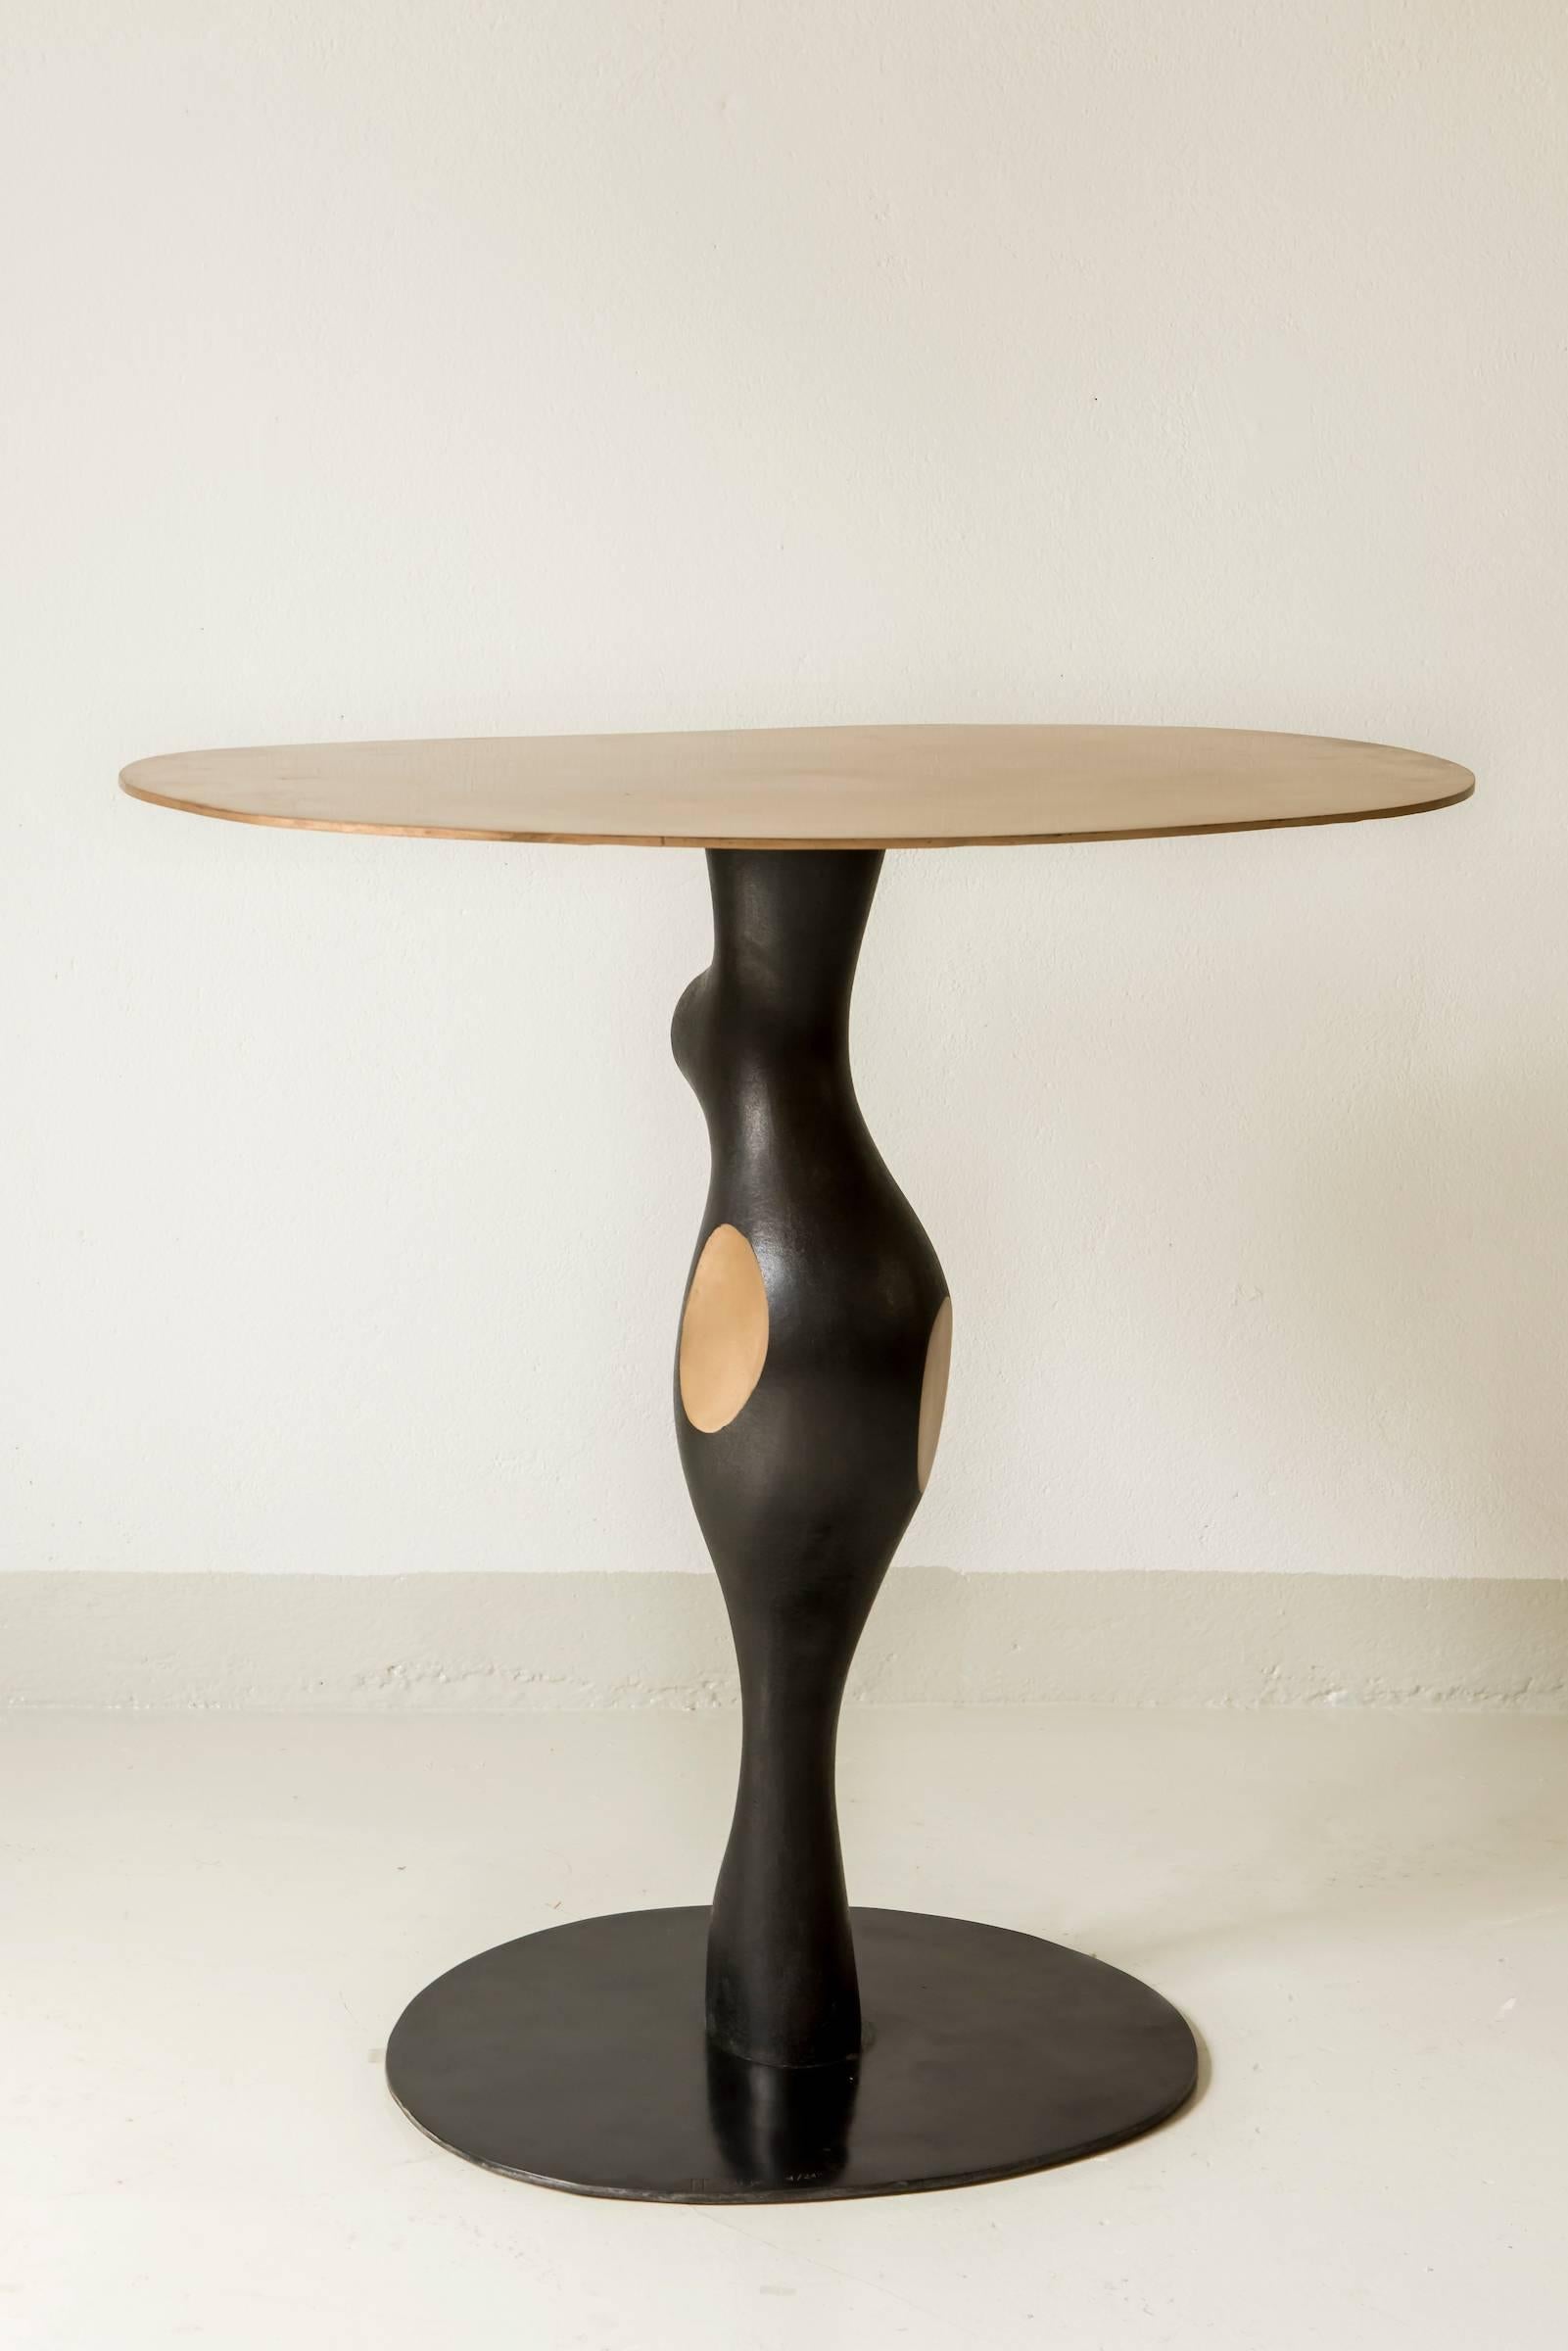 French Bronze Pedestal Table by Jacques Jarrige 